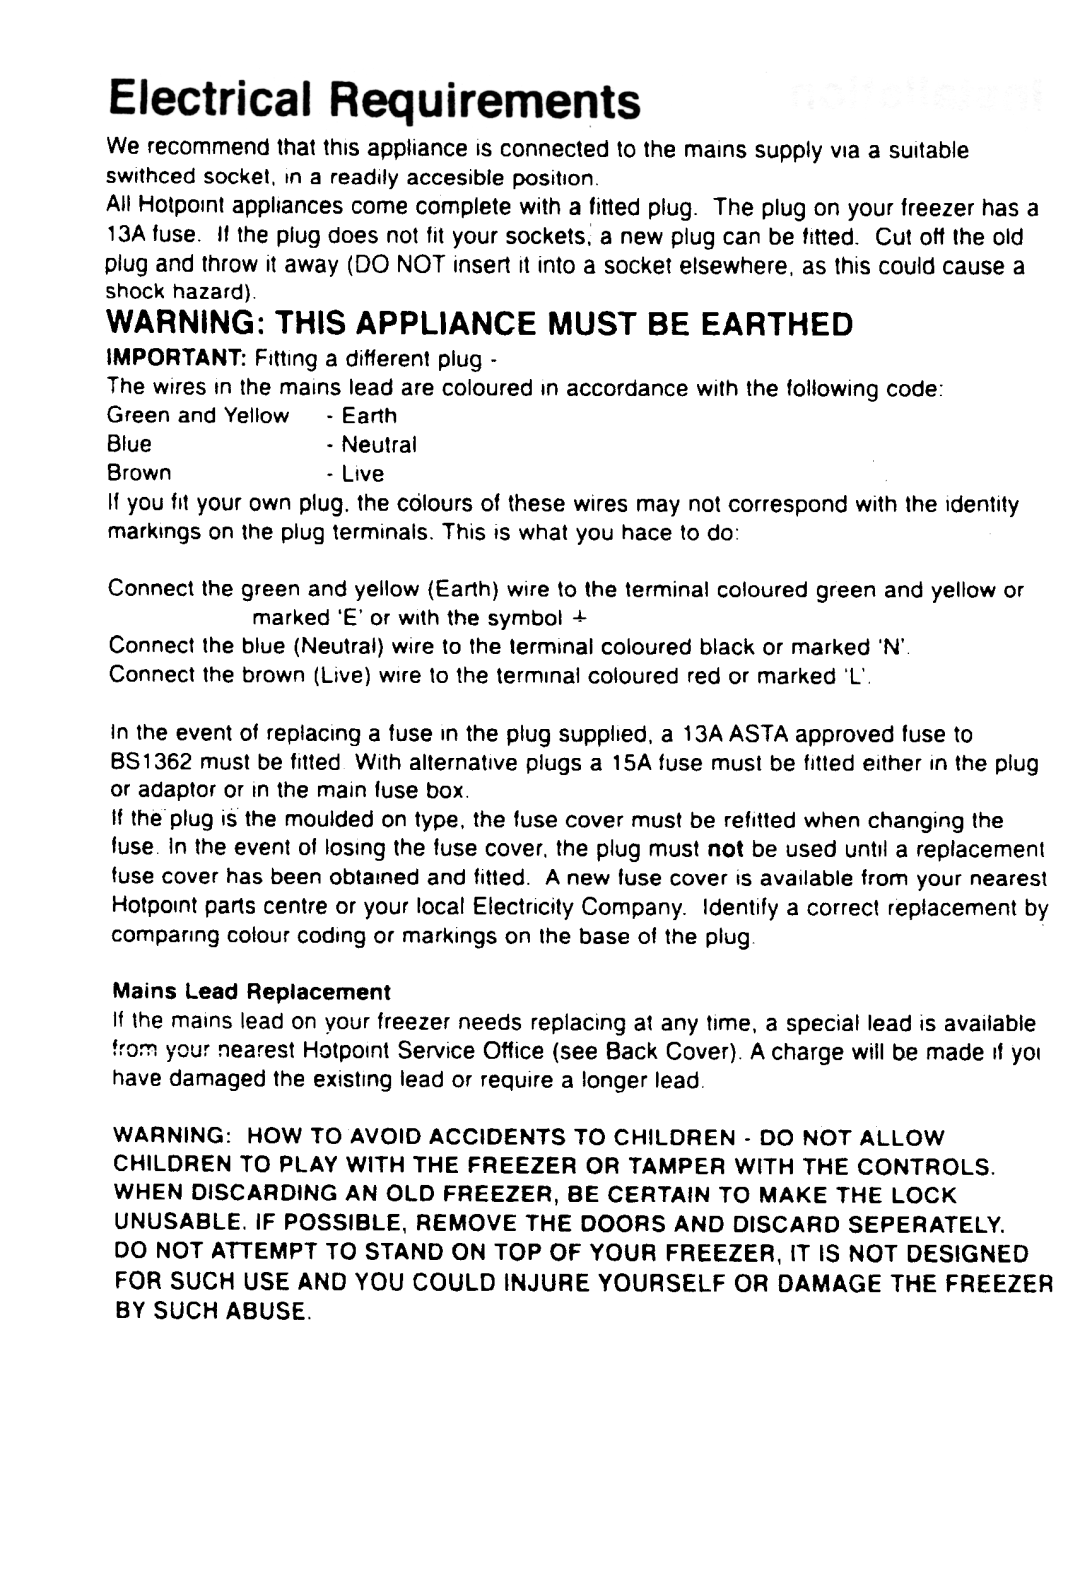 Hotpoint RC16P manual Warning This Appliance Must Be Earthed 